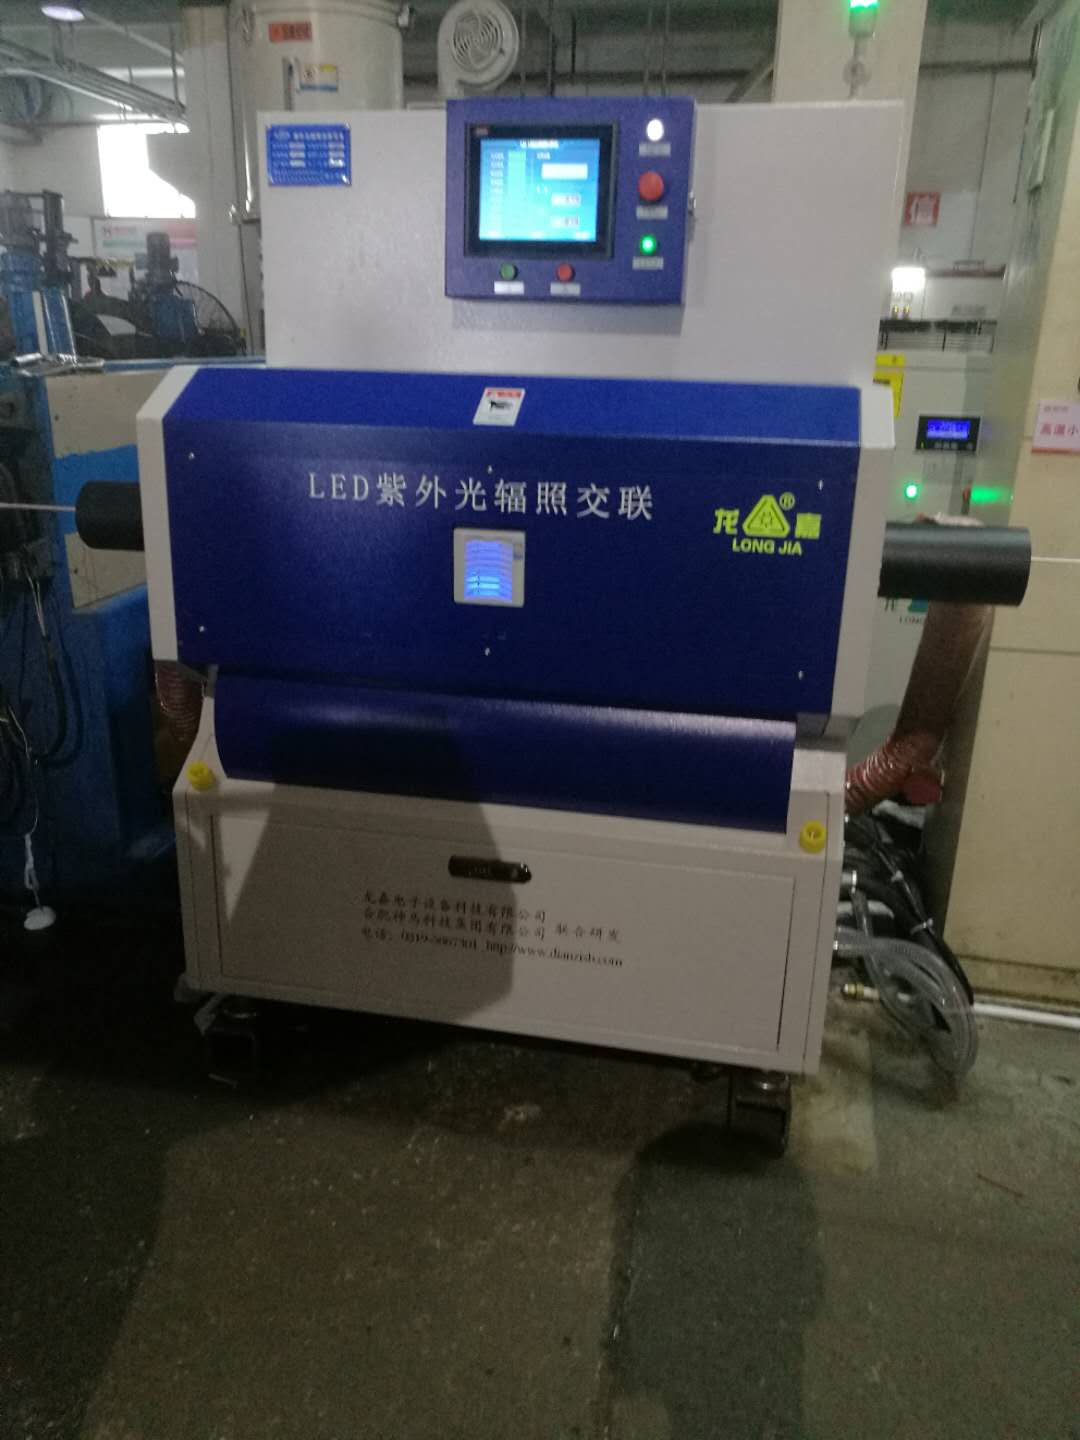 LED ultraviolet irradiation cross - linking equipment in the cable factory test site